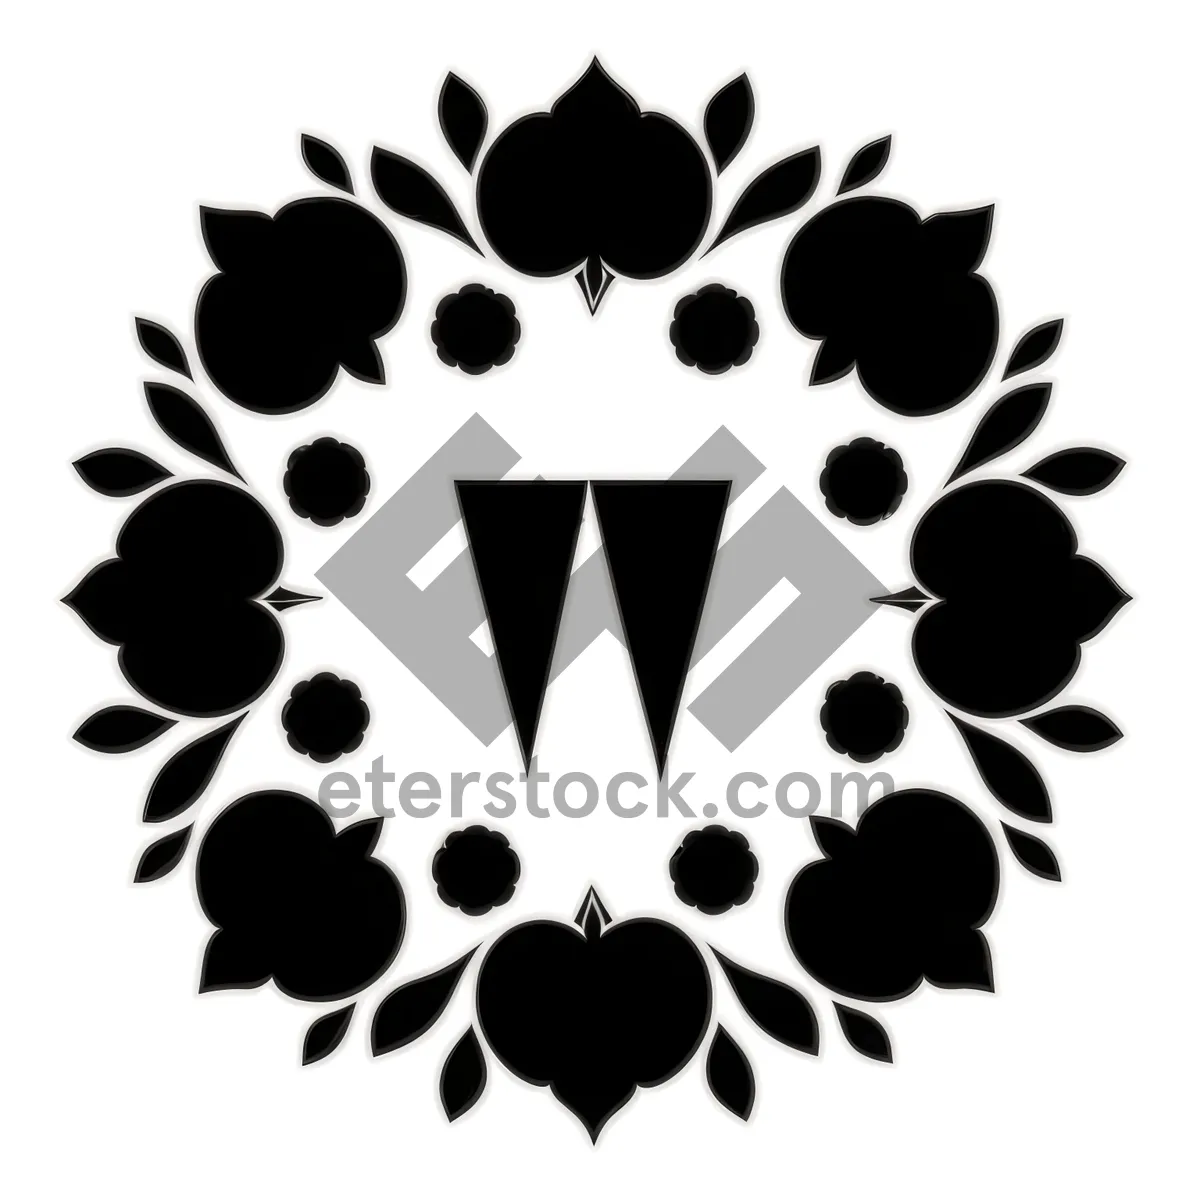 Picture of Floral Heraldry: Intricate Ornate Icon with Floral Elements